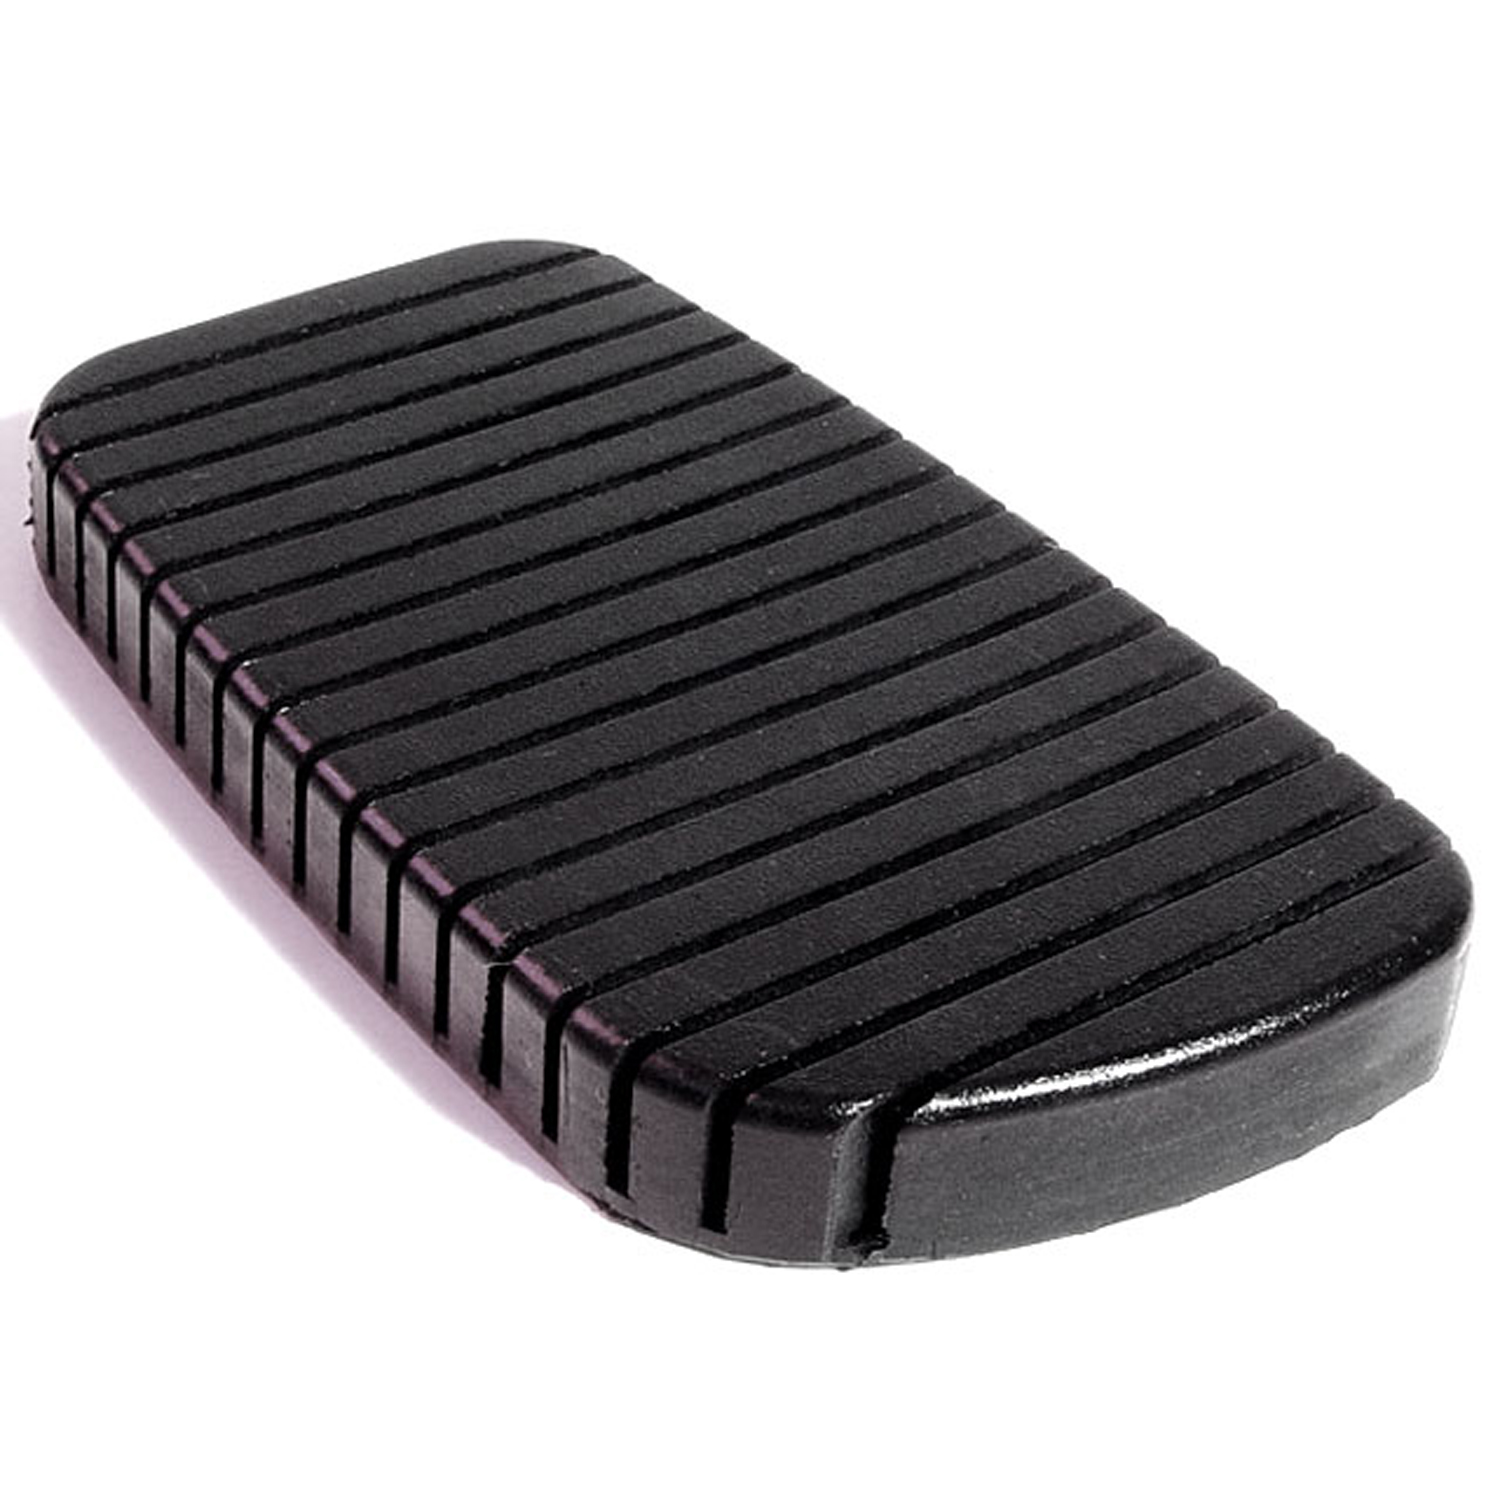 1953 Ford Country Sedan Brake Pedal Pad.  Correct reproduction of a difficult part-CB 90-C